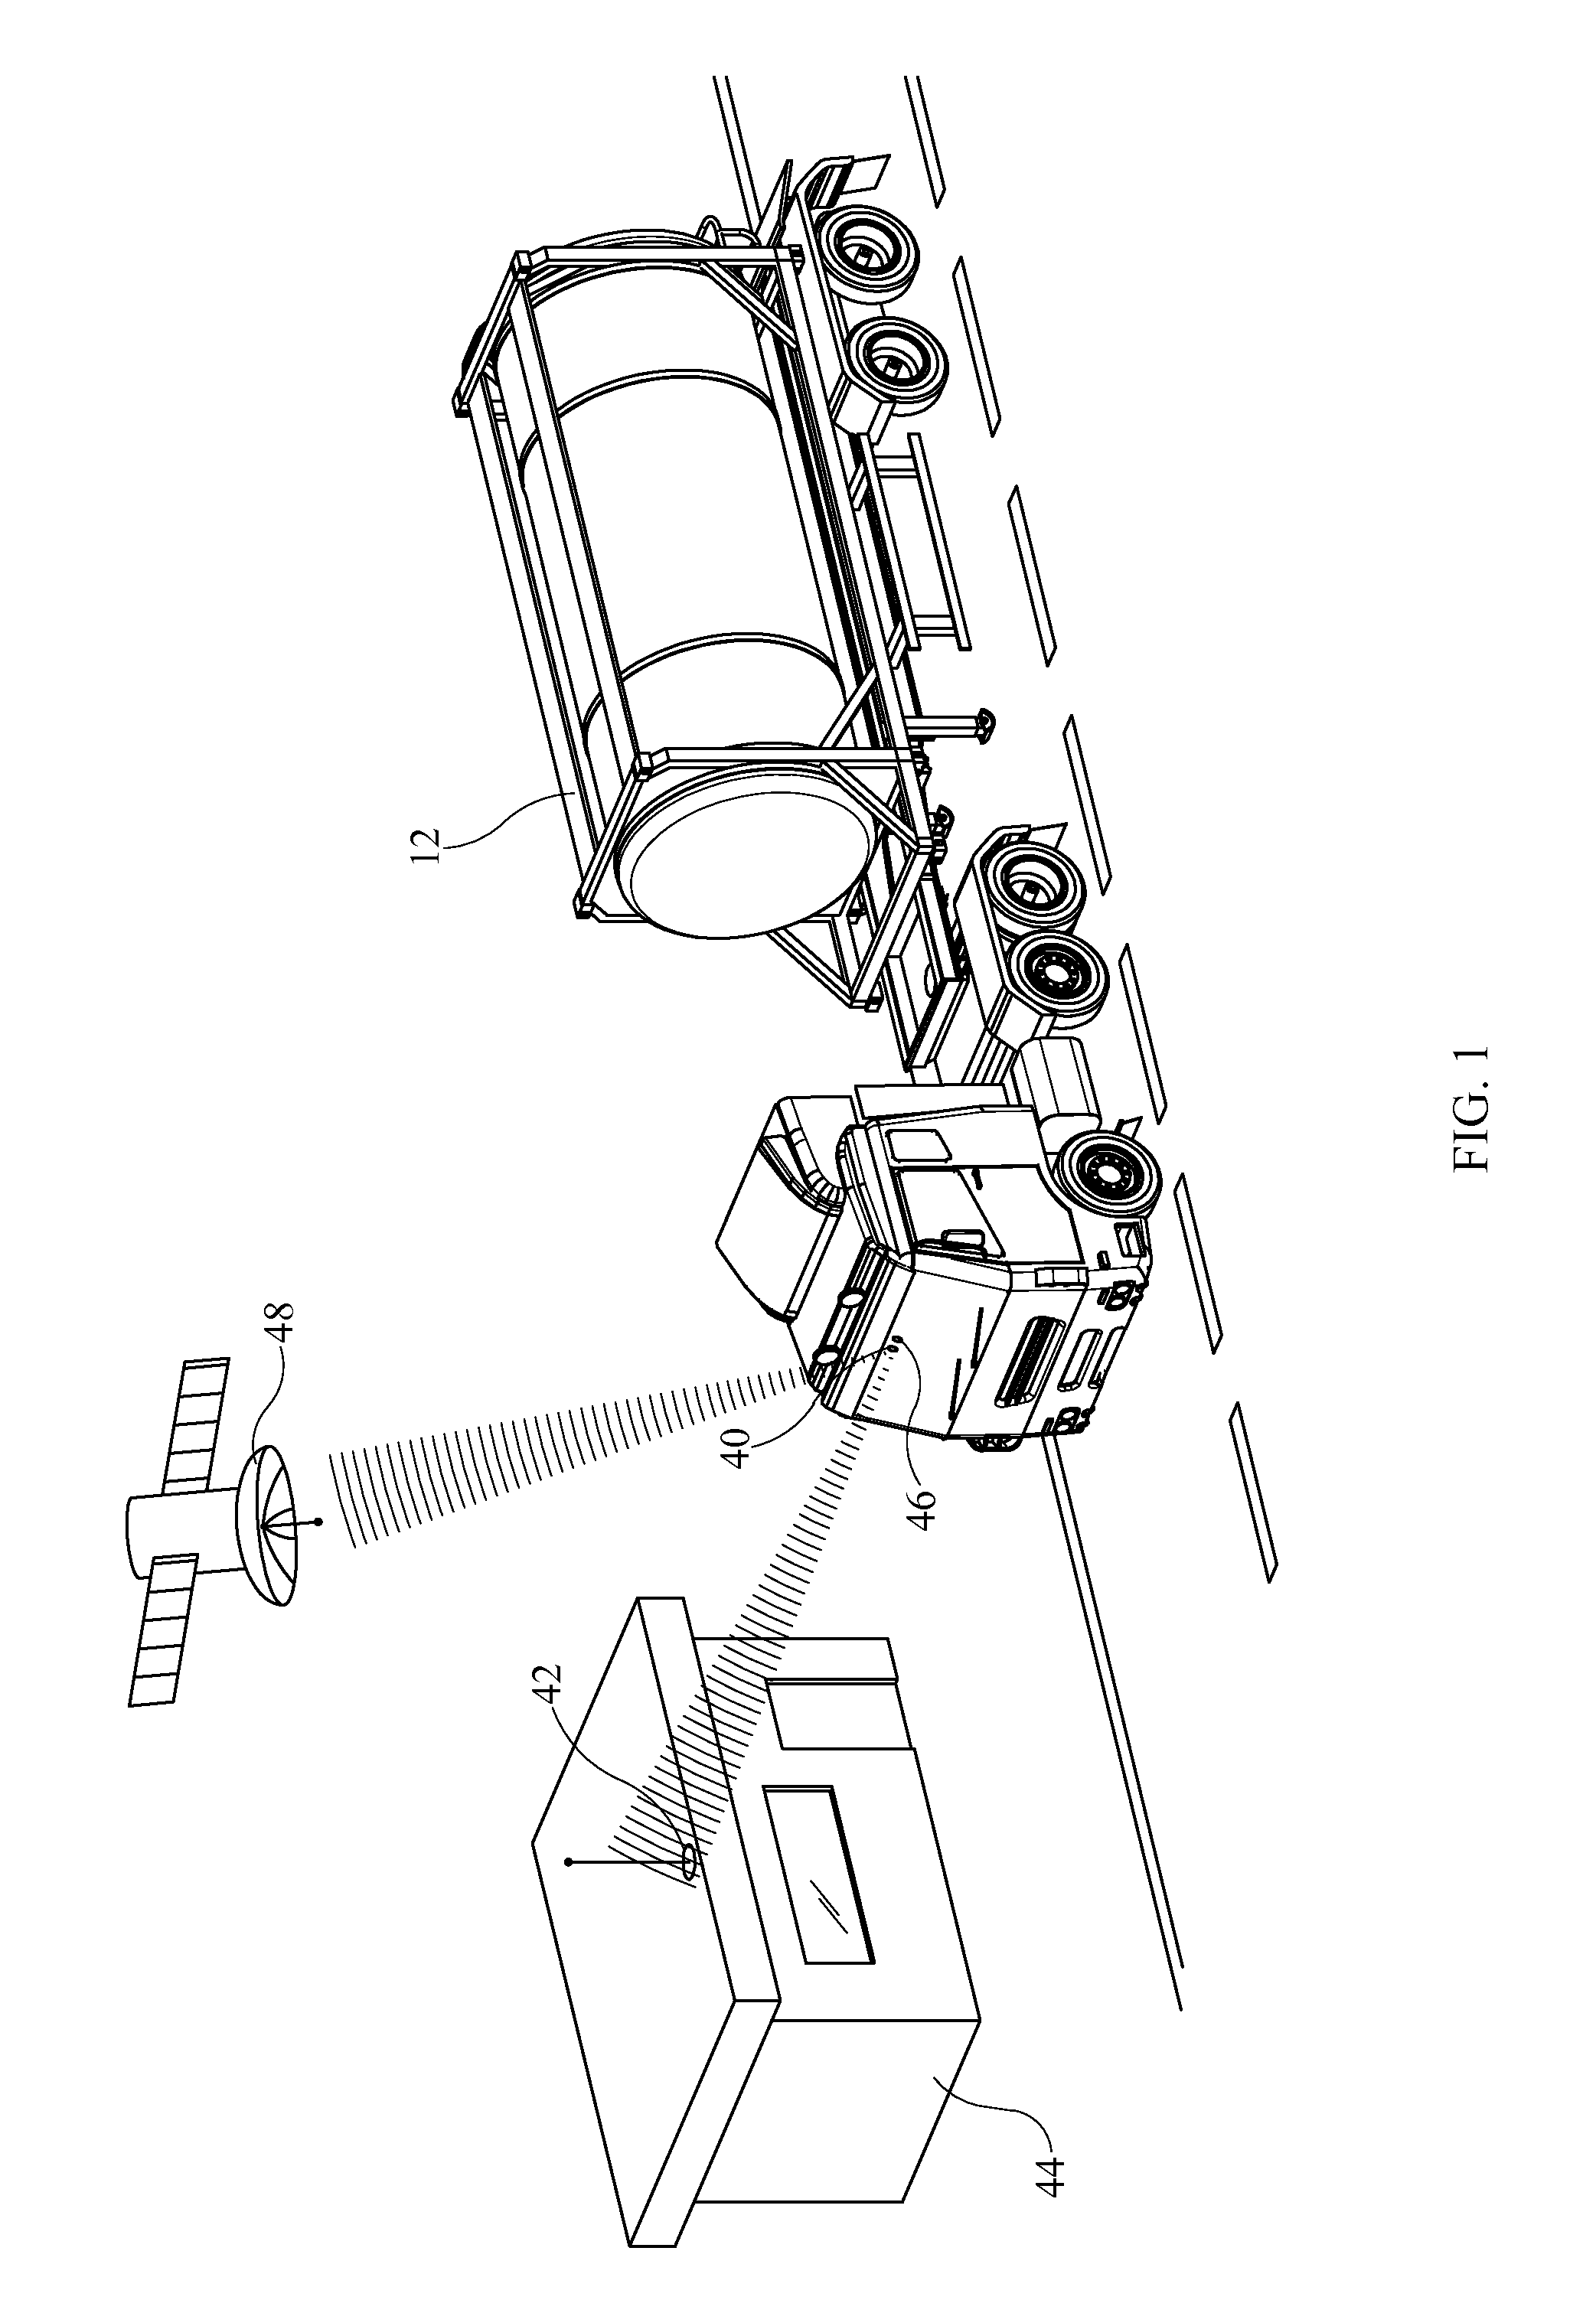 Controllable load distribution system for a vehicle